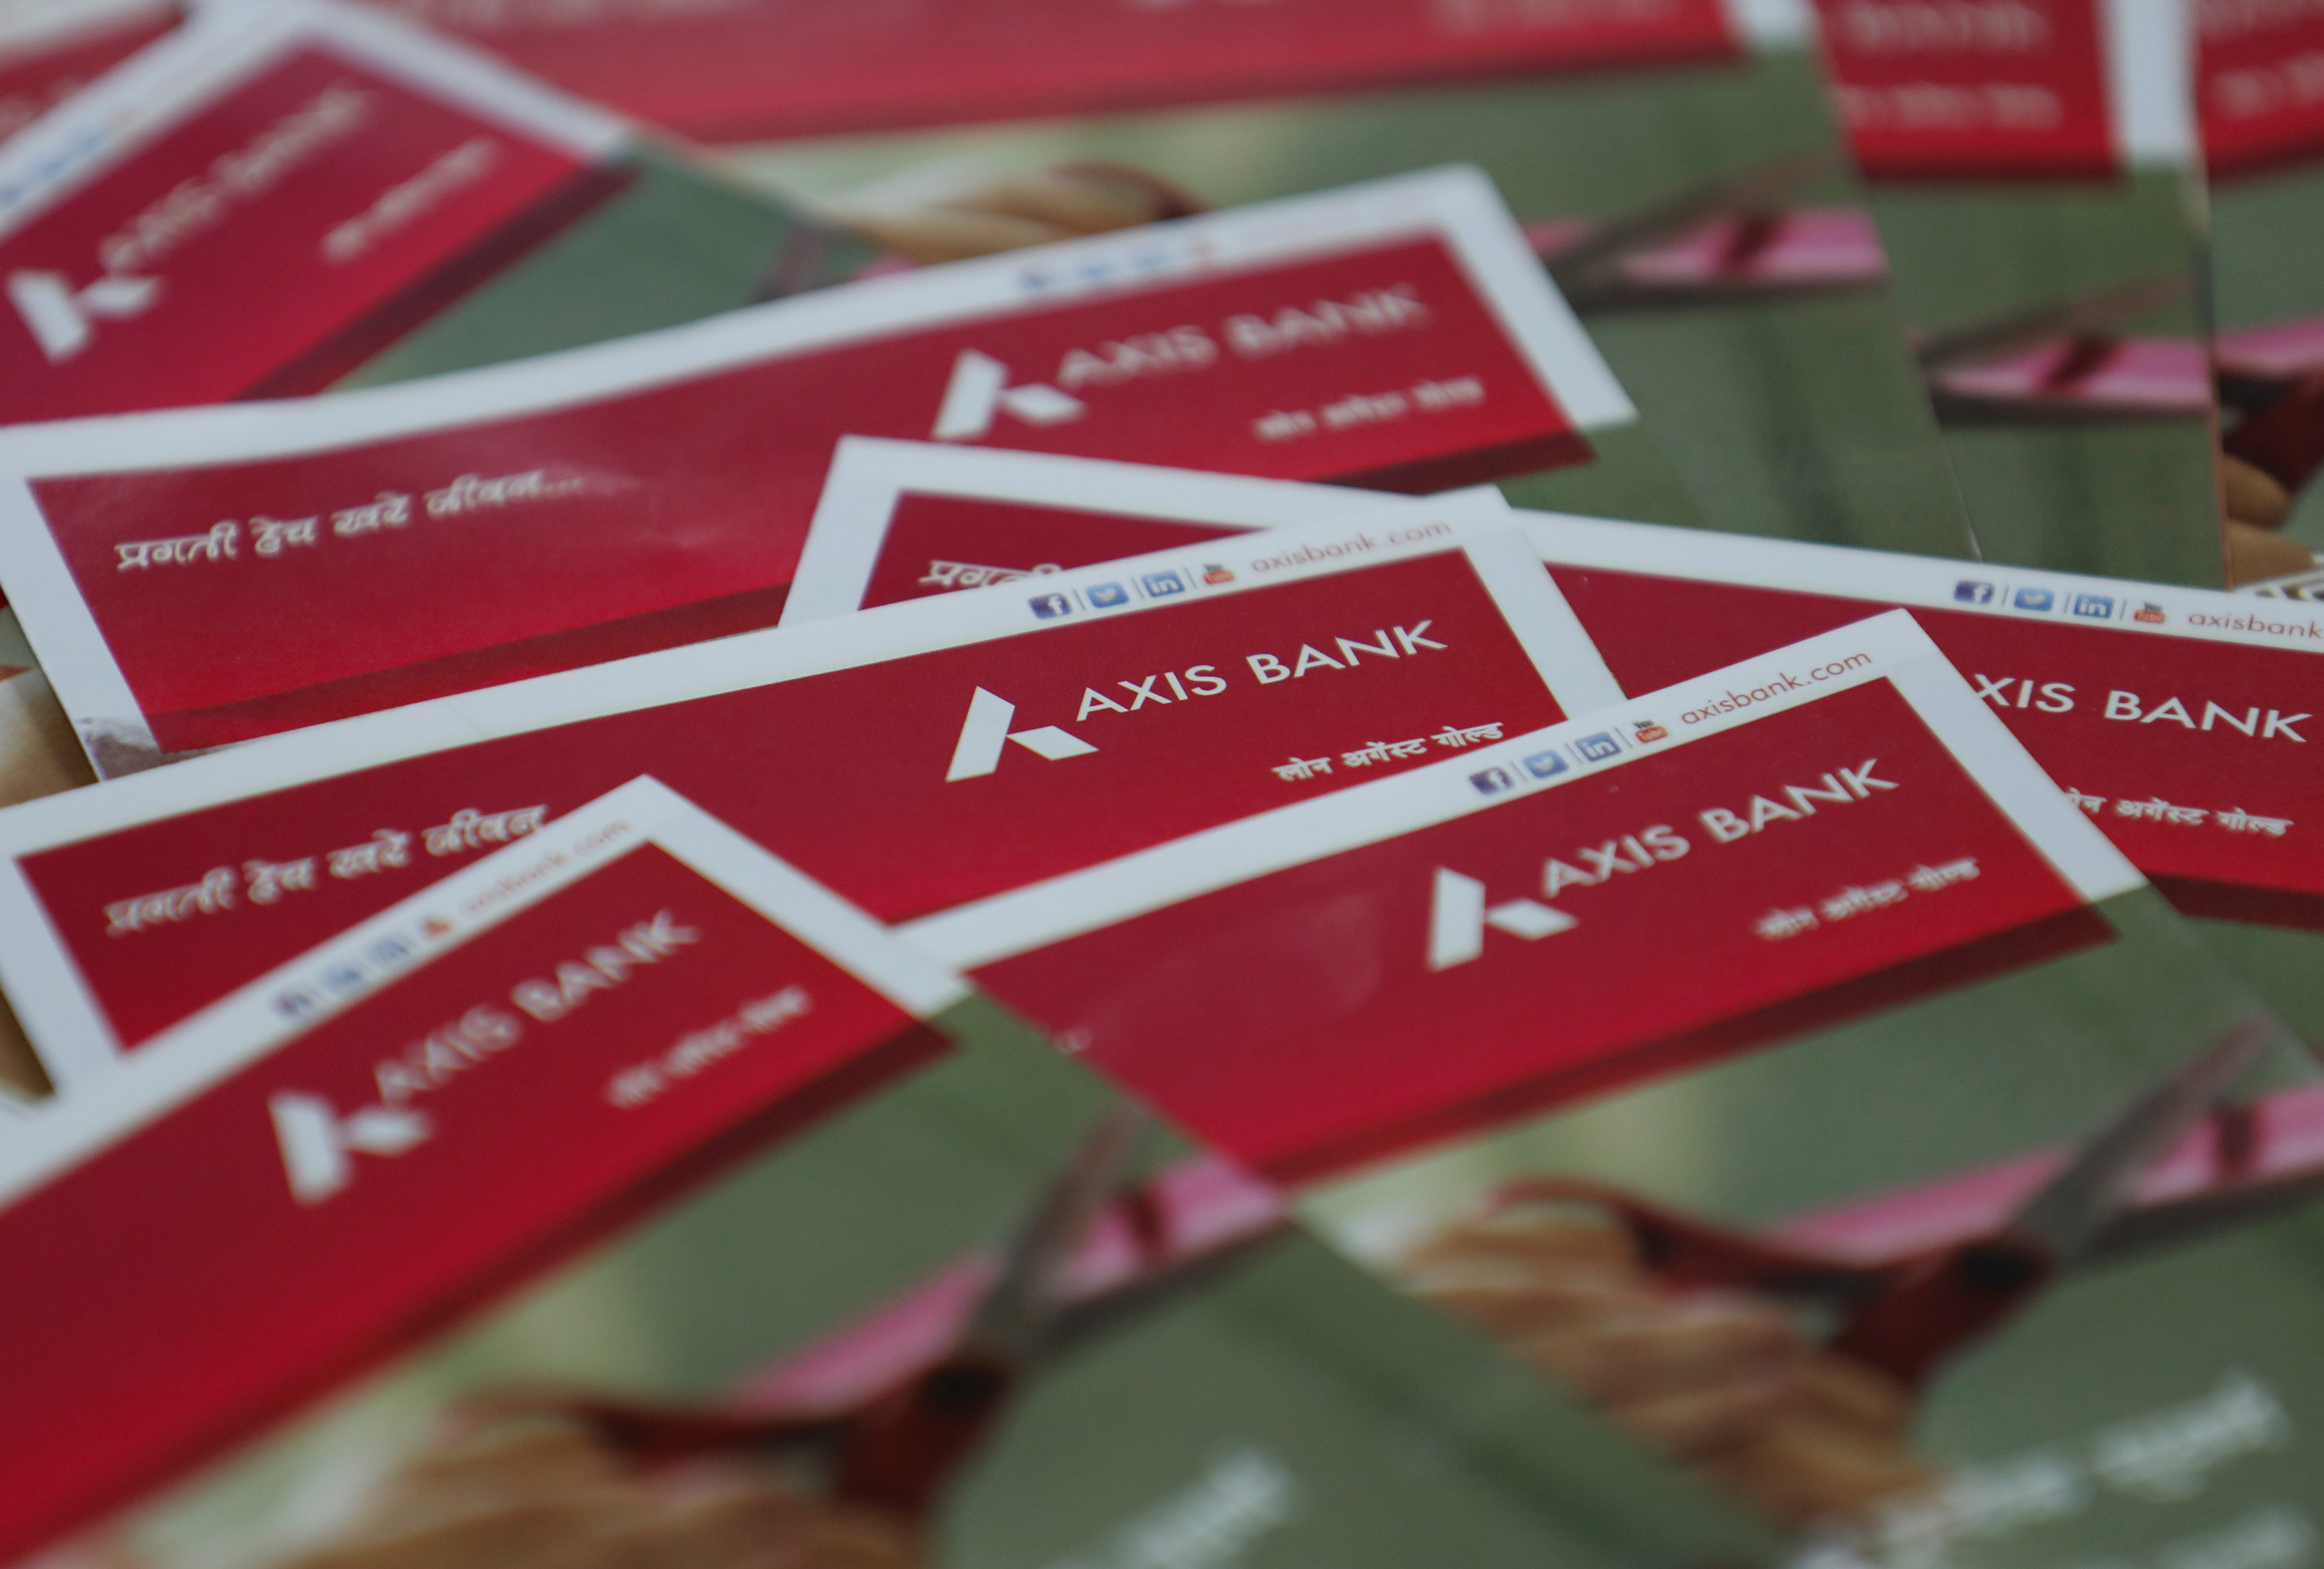 Brochures are seen at a branch of Axis Bank in Mumbai